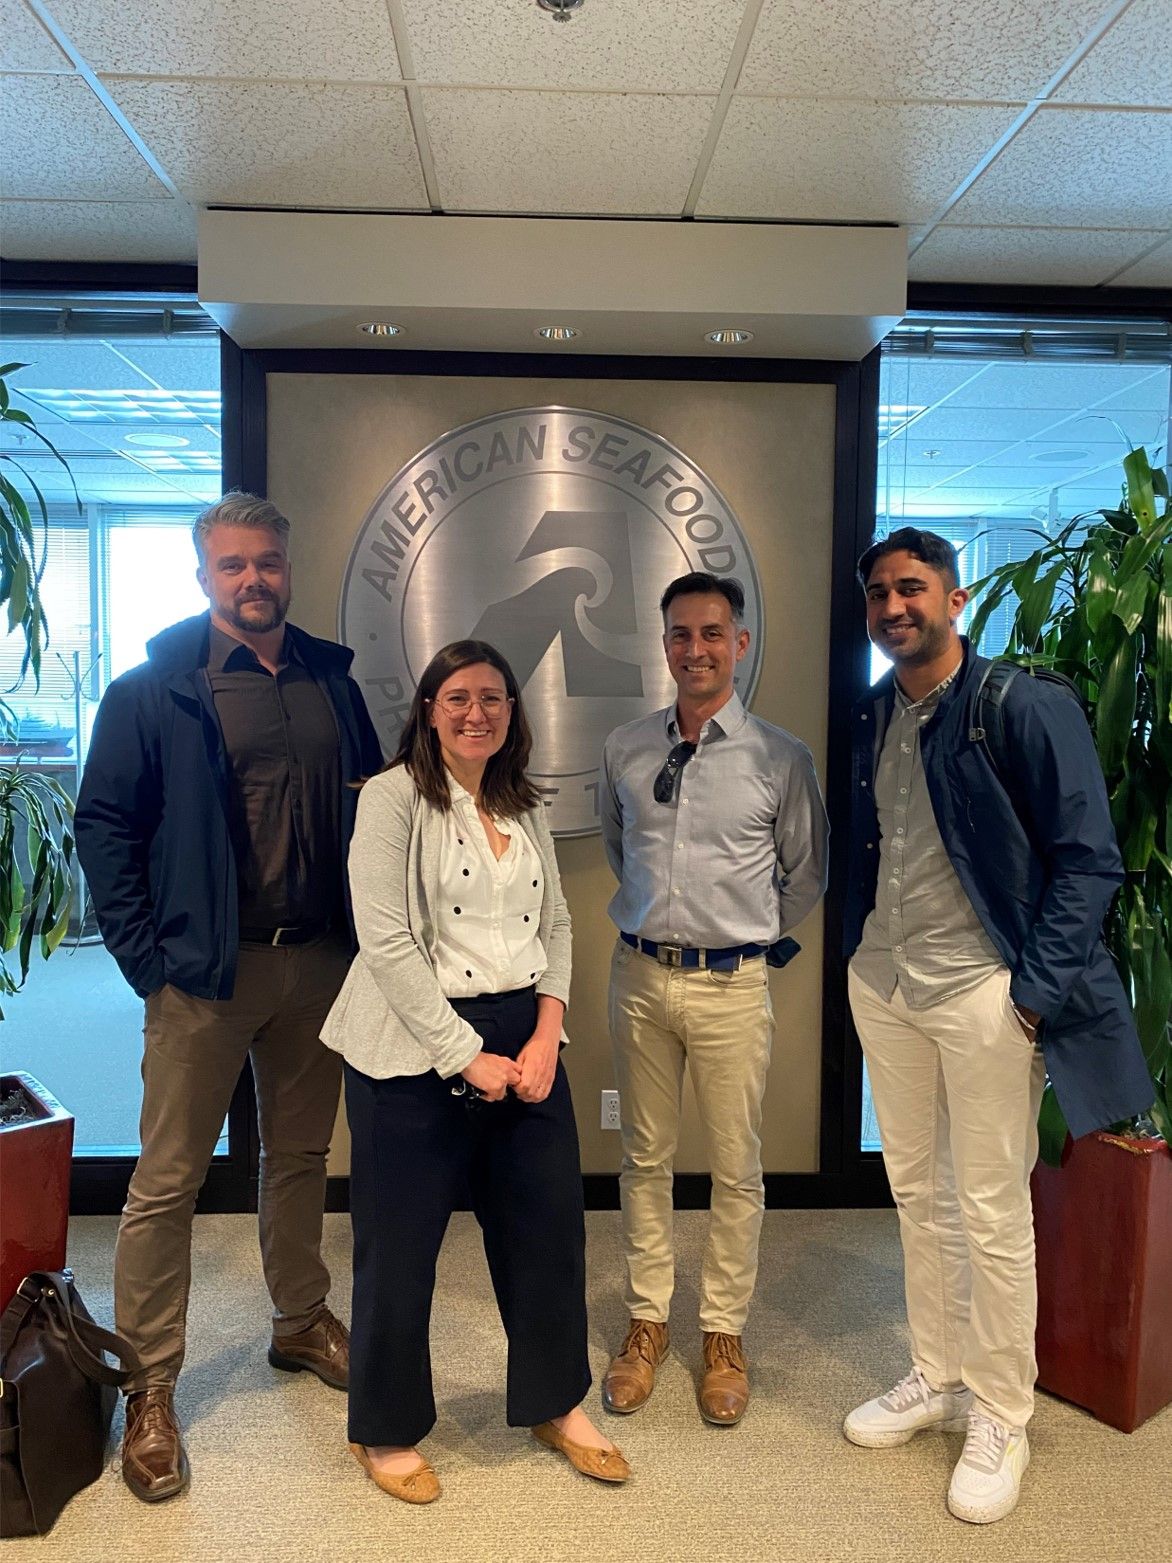 Tim Fitzgerald, Chief Sustainability Officer of American Seafoods with Nils Parborg, Susie Jahren and Mandip Singh at American Seafoods headquarter in Seattle